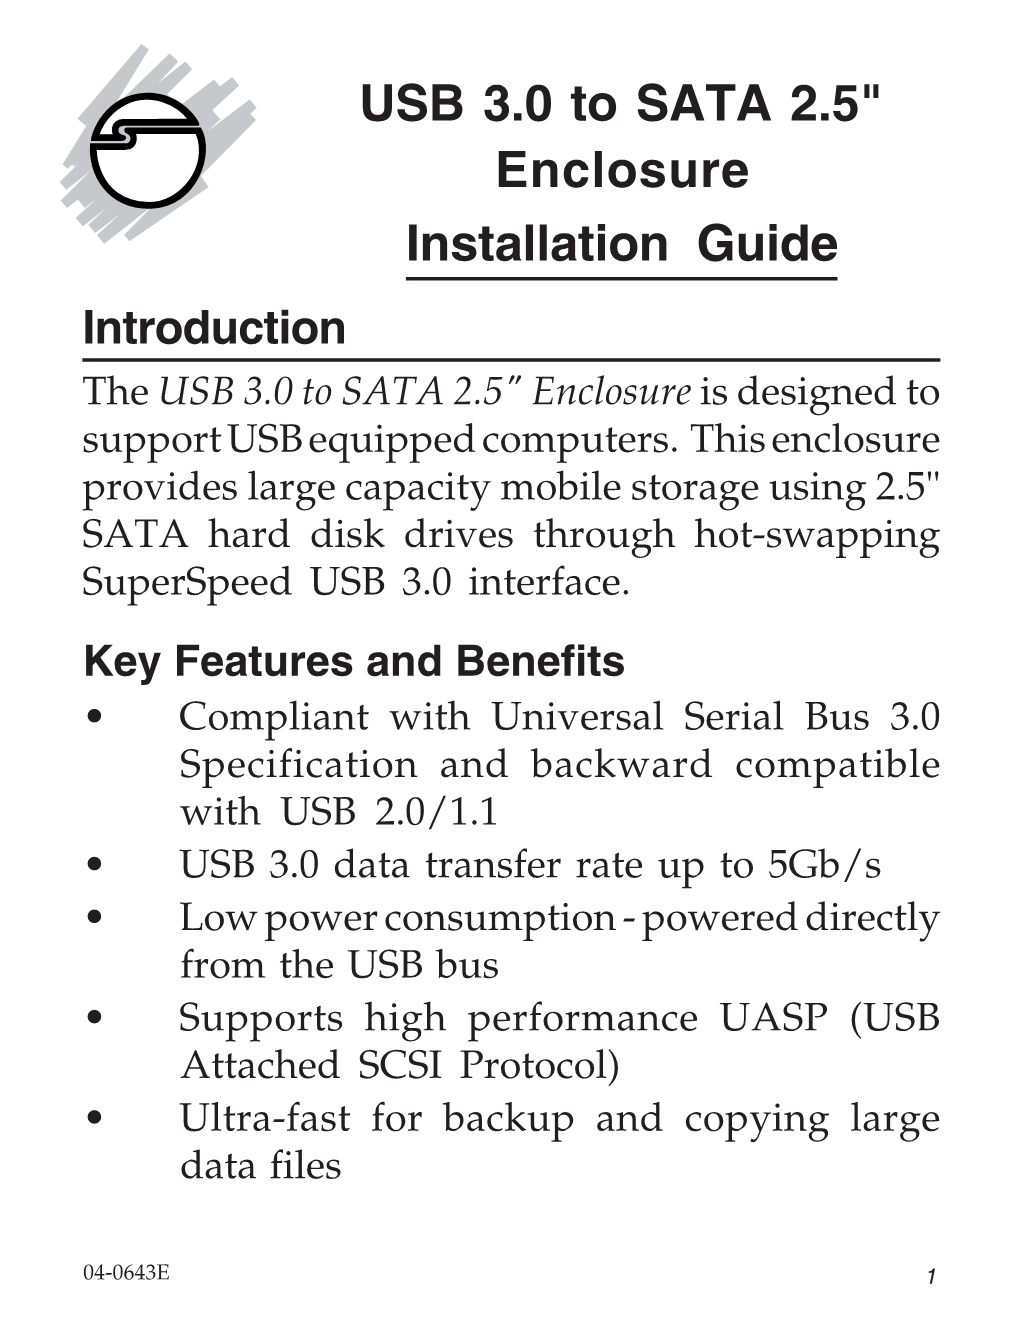 USB 3.0 to SATA 2.5" Enclosure Installation Guide Introduction the USB 3.0 to SATA 2.5" Enclosure Is Designed to Support USB Equipped Computers